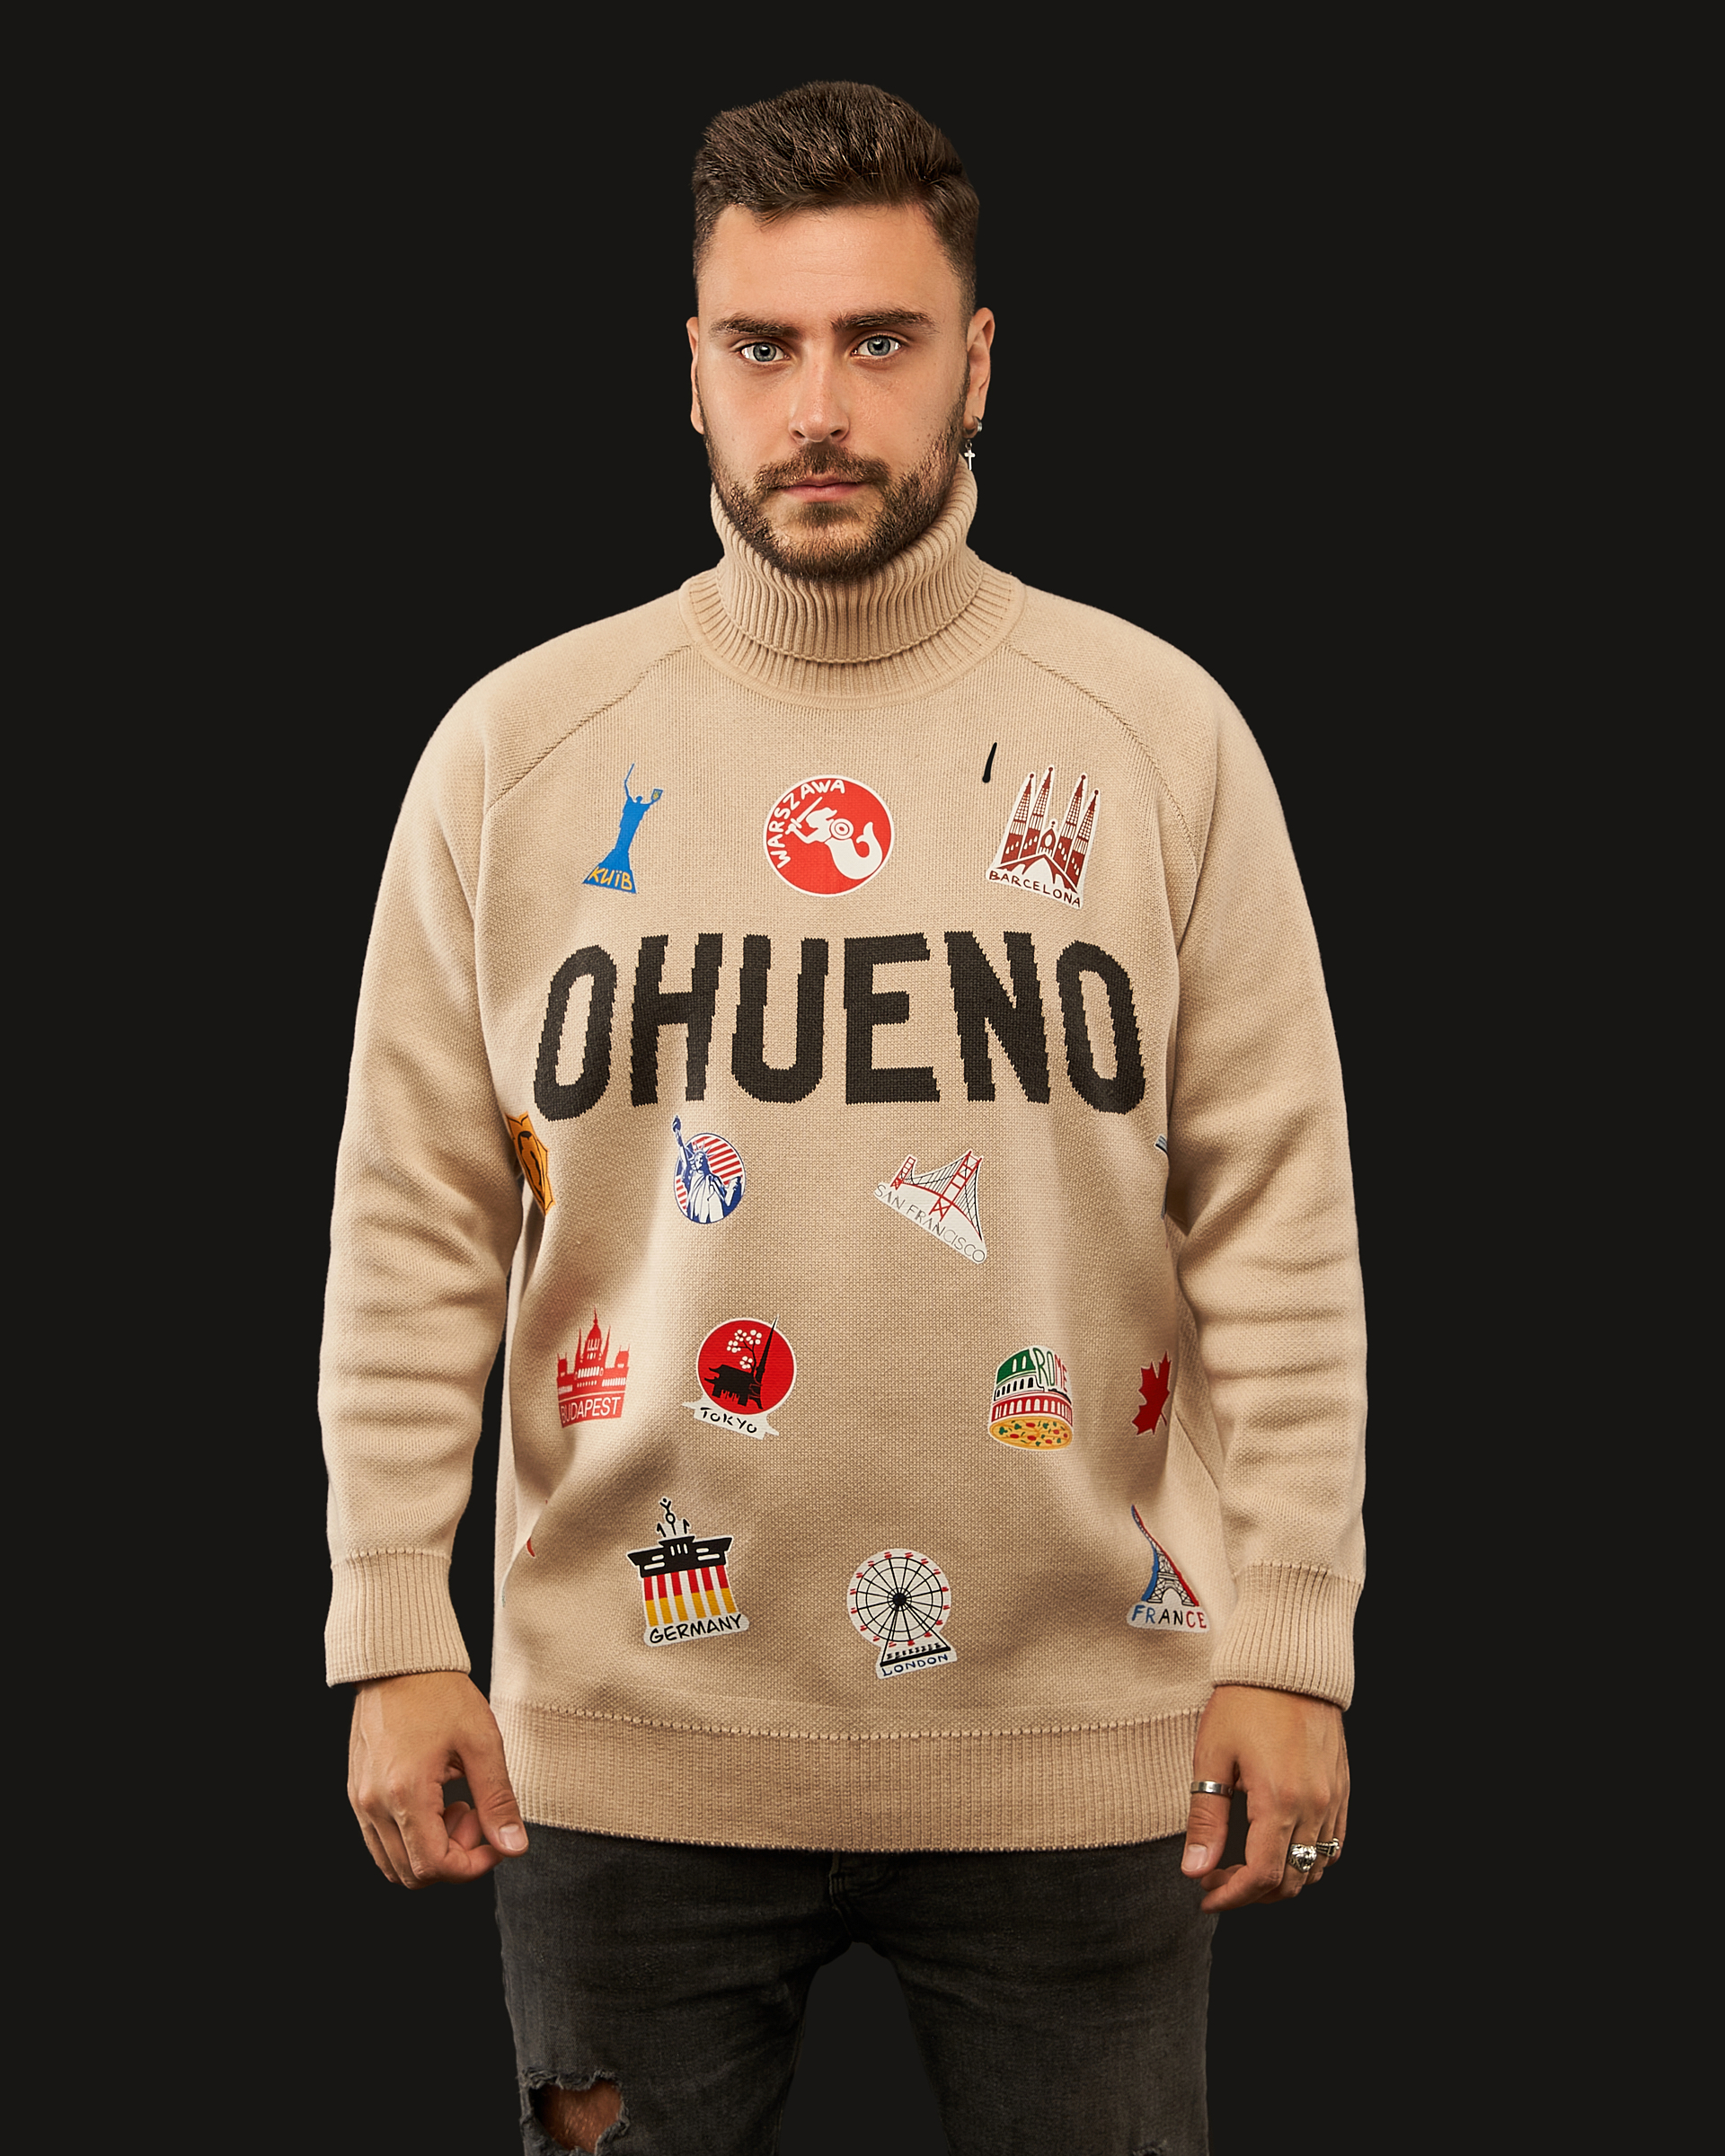 Sweater (beige) Image: https://ohueno-official.com/wp-content/uploads/m01948-1.jpg